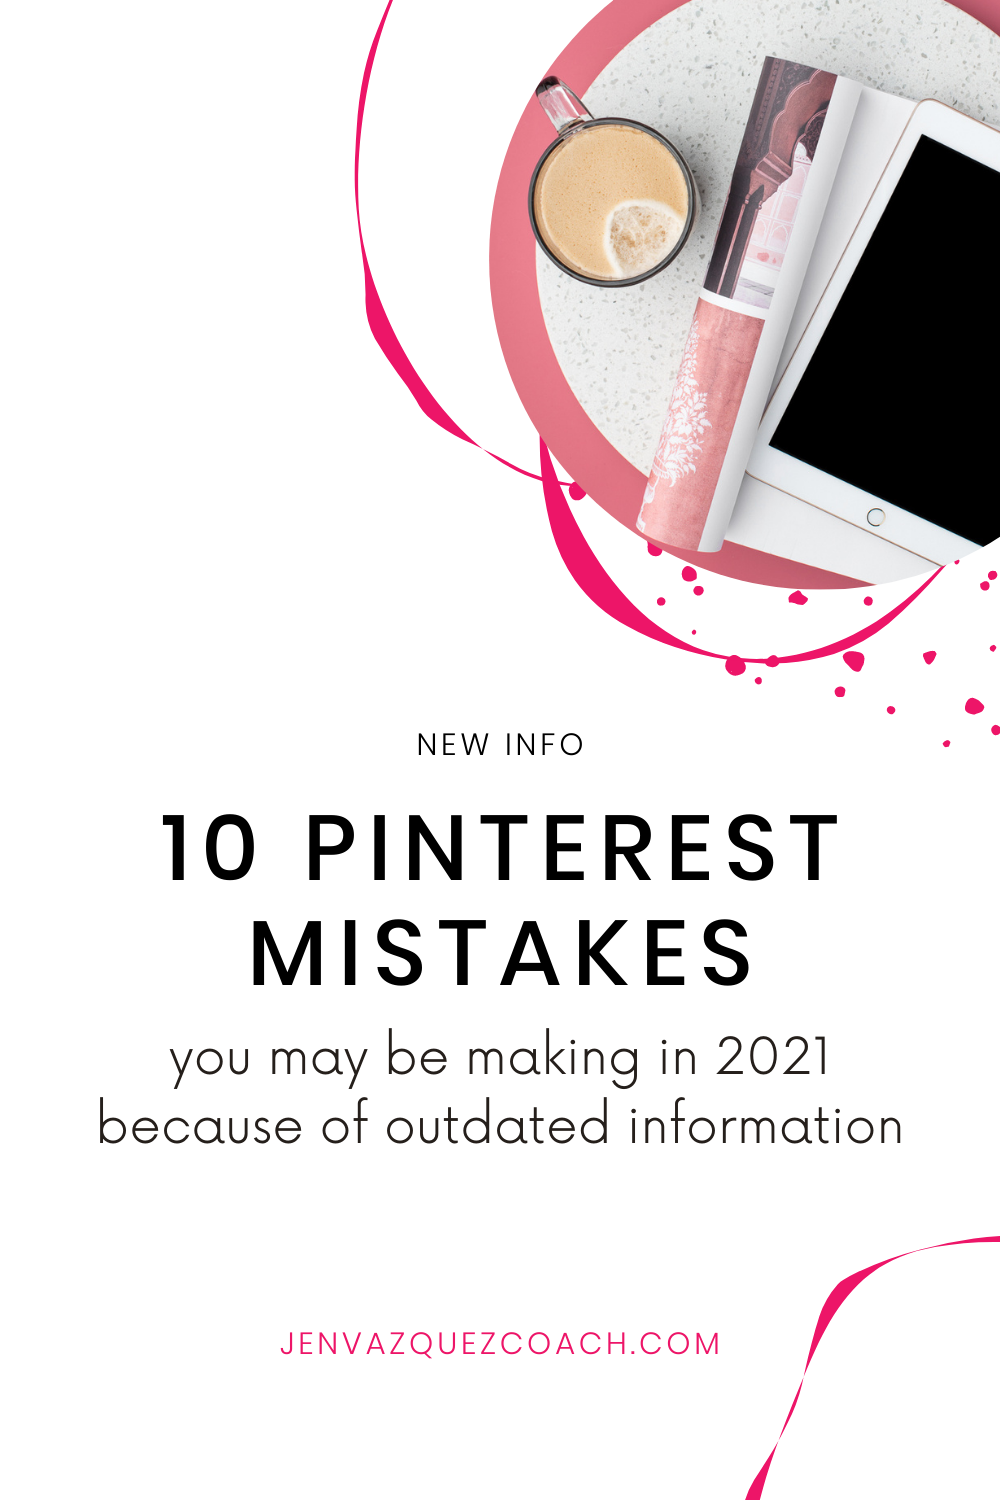 10 Pinterest mistakes you may be making in 2021 because of outdated information